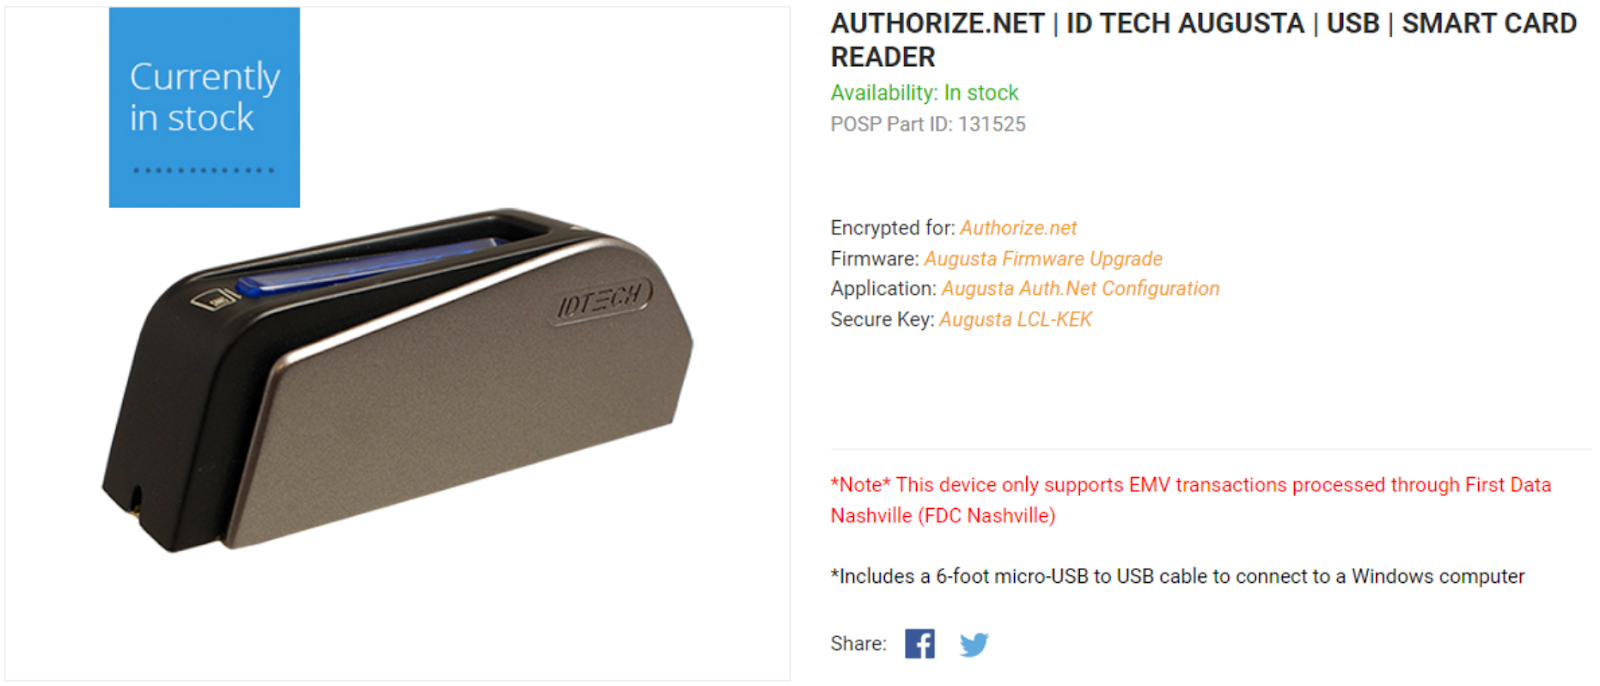 Authorize.net's card reader